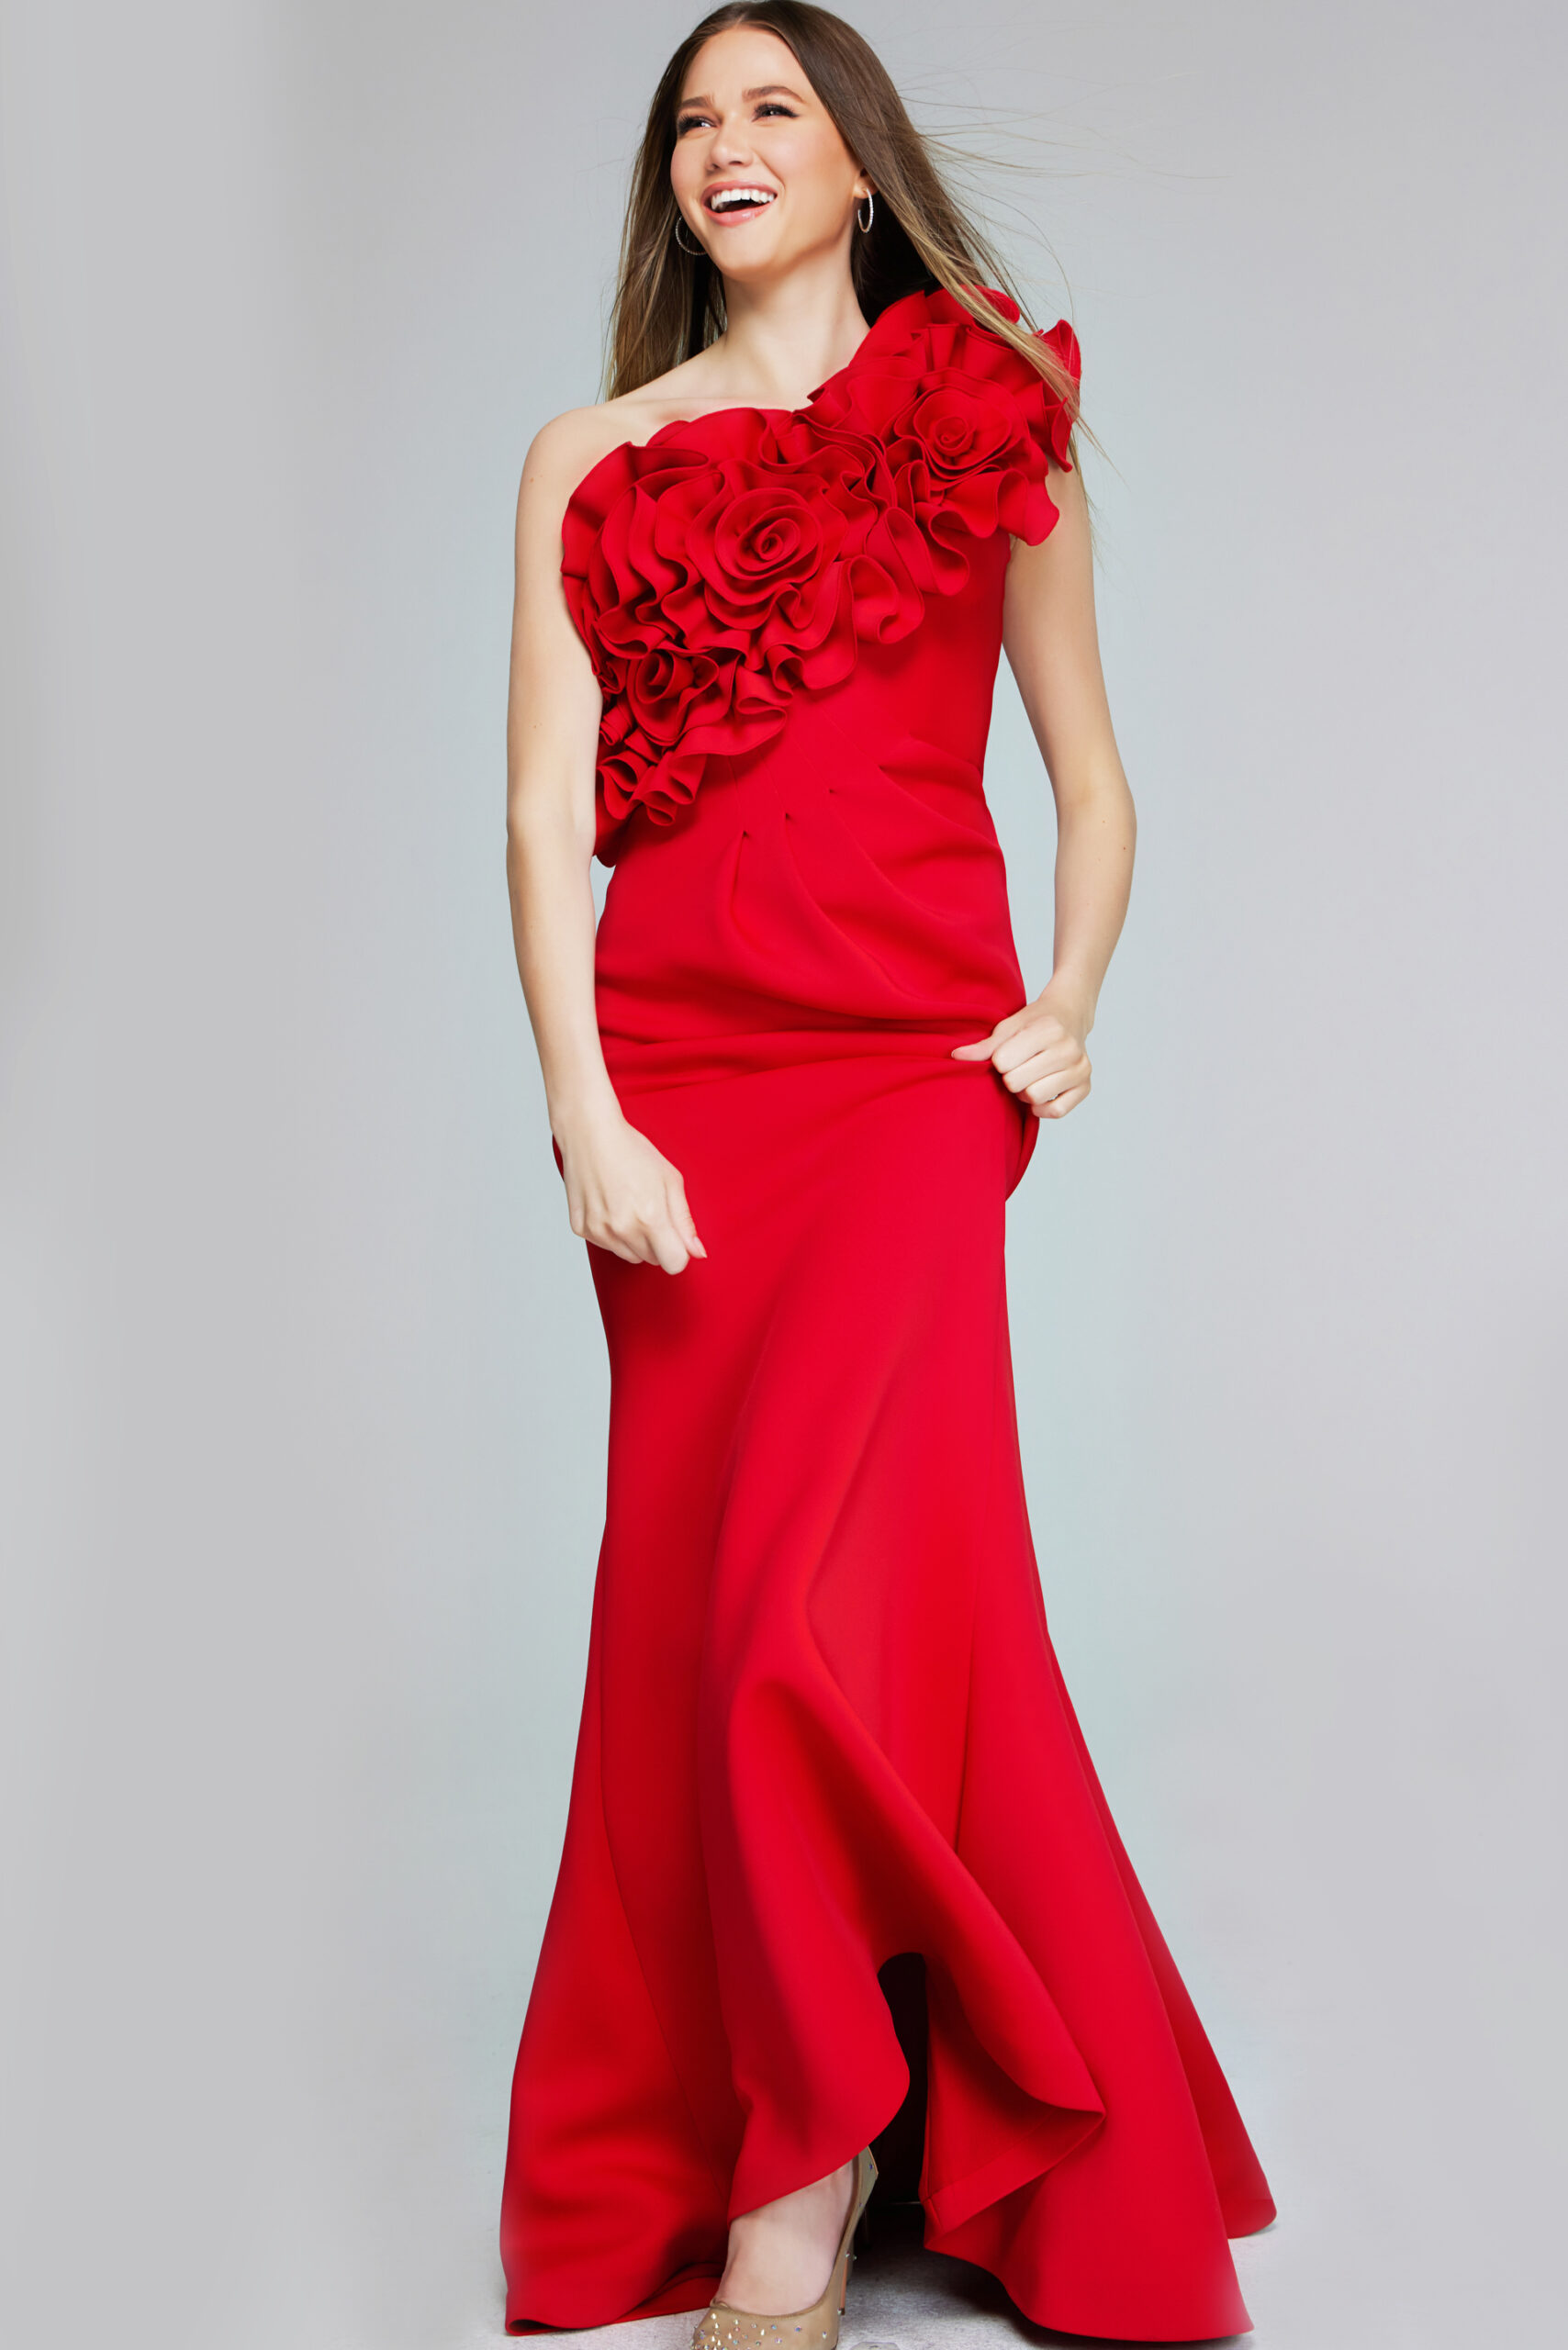 Enchanting One-Shoulder Red Gown with 3D Floral Appliqué 39751